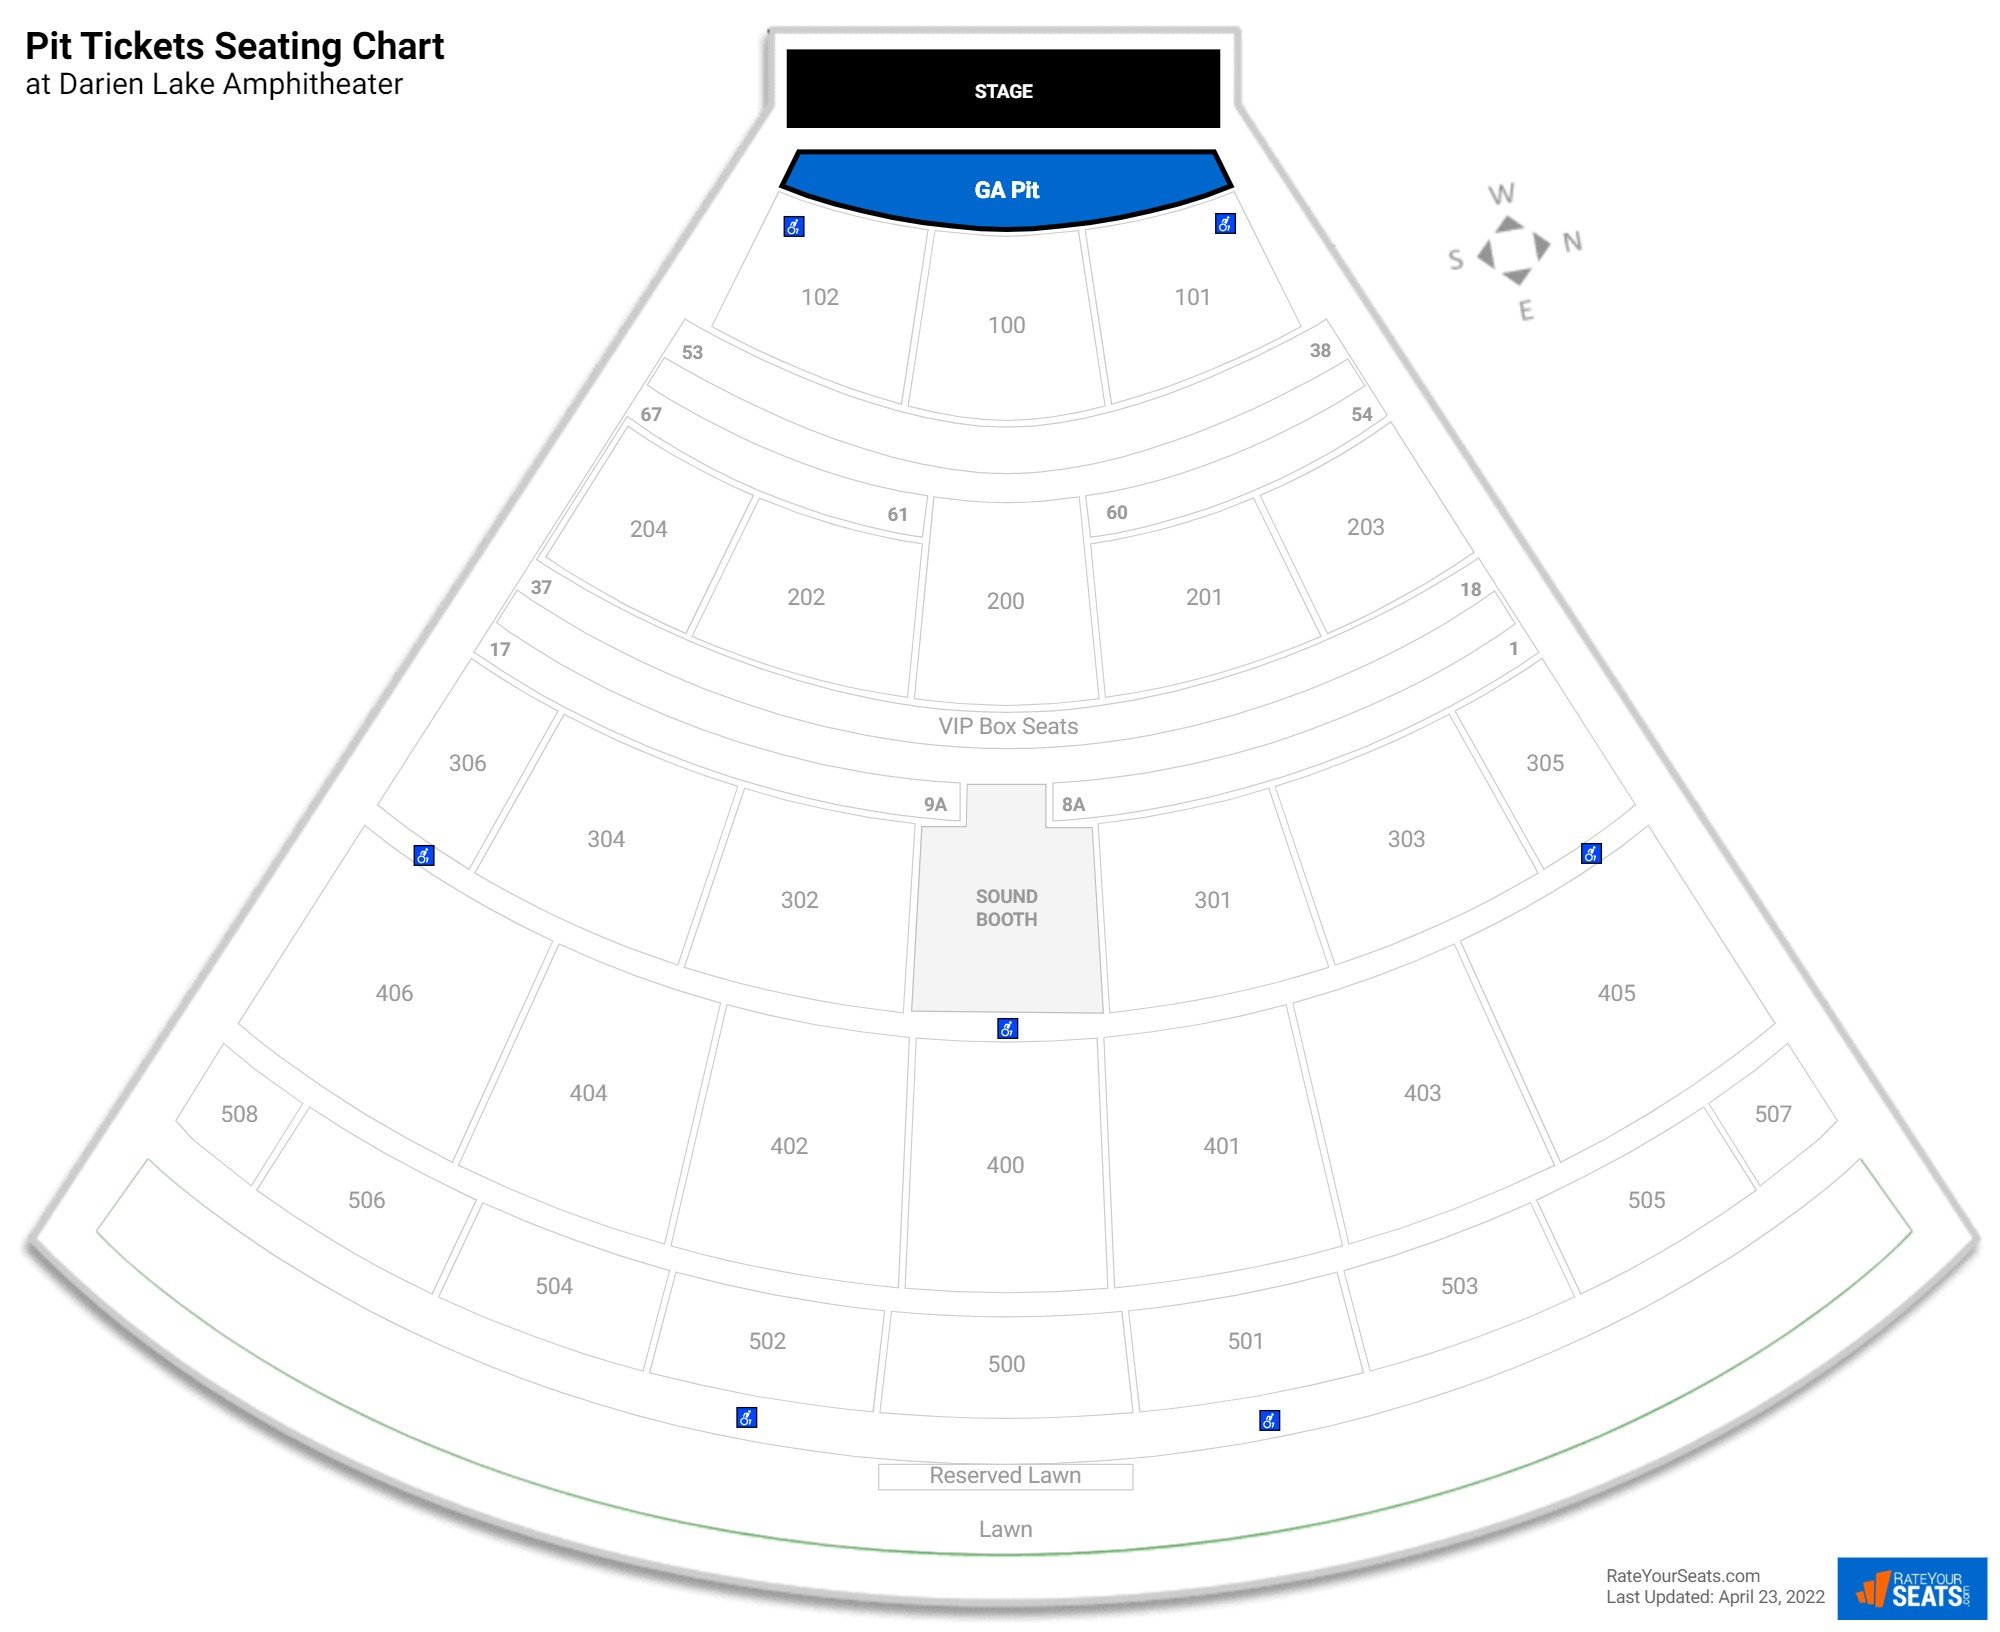 Concert Pit Tickets Seating Chart at Darien Lake Amphitheater